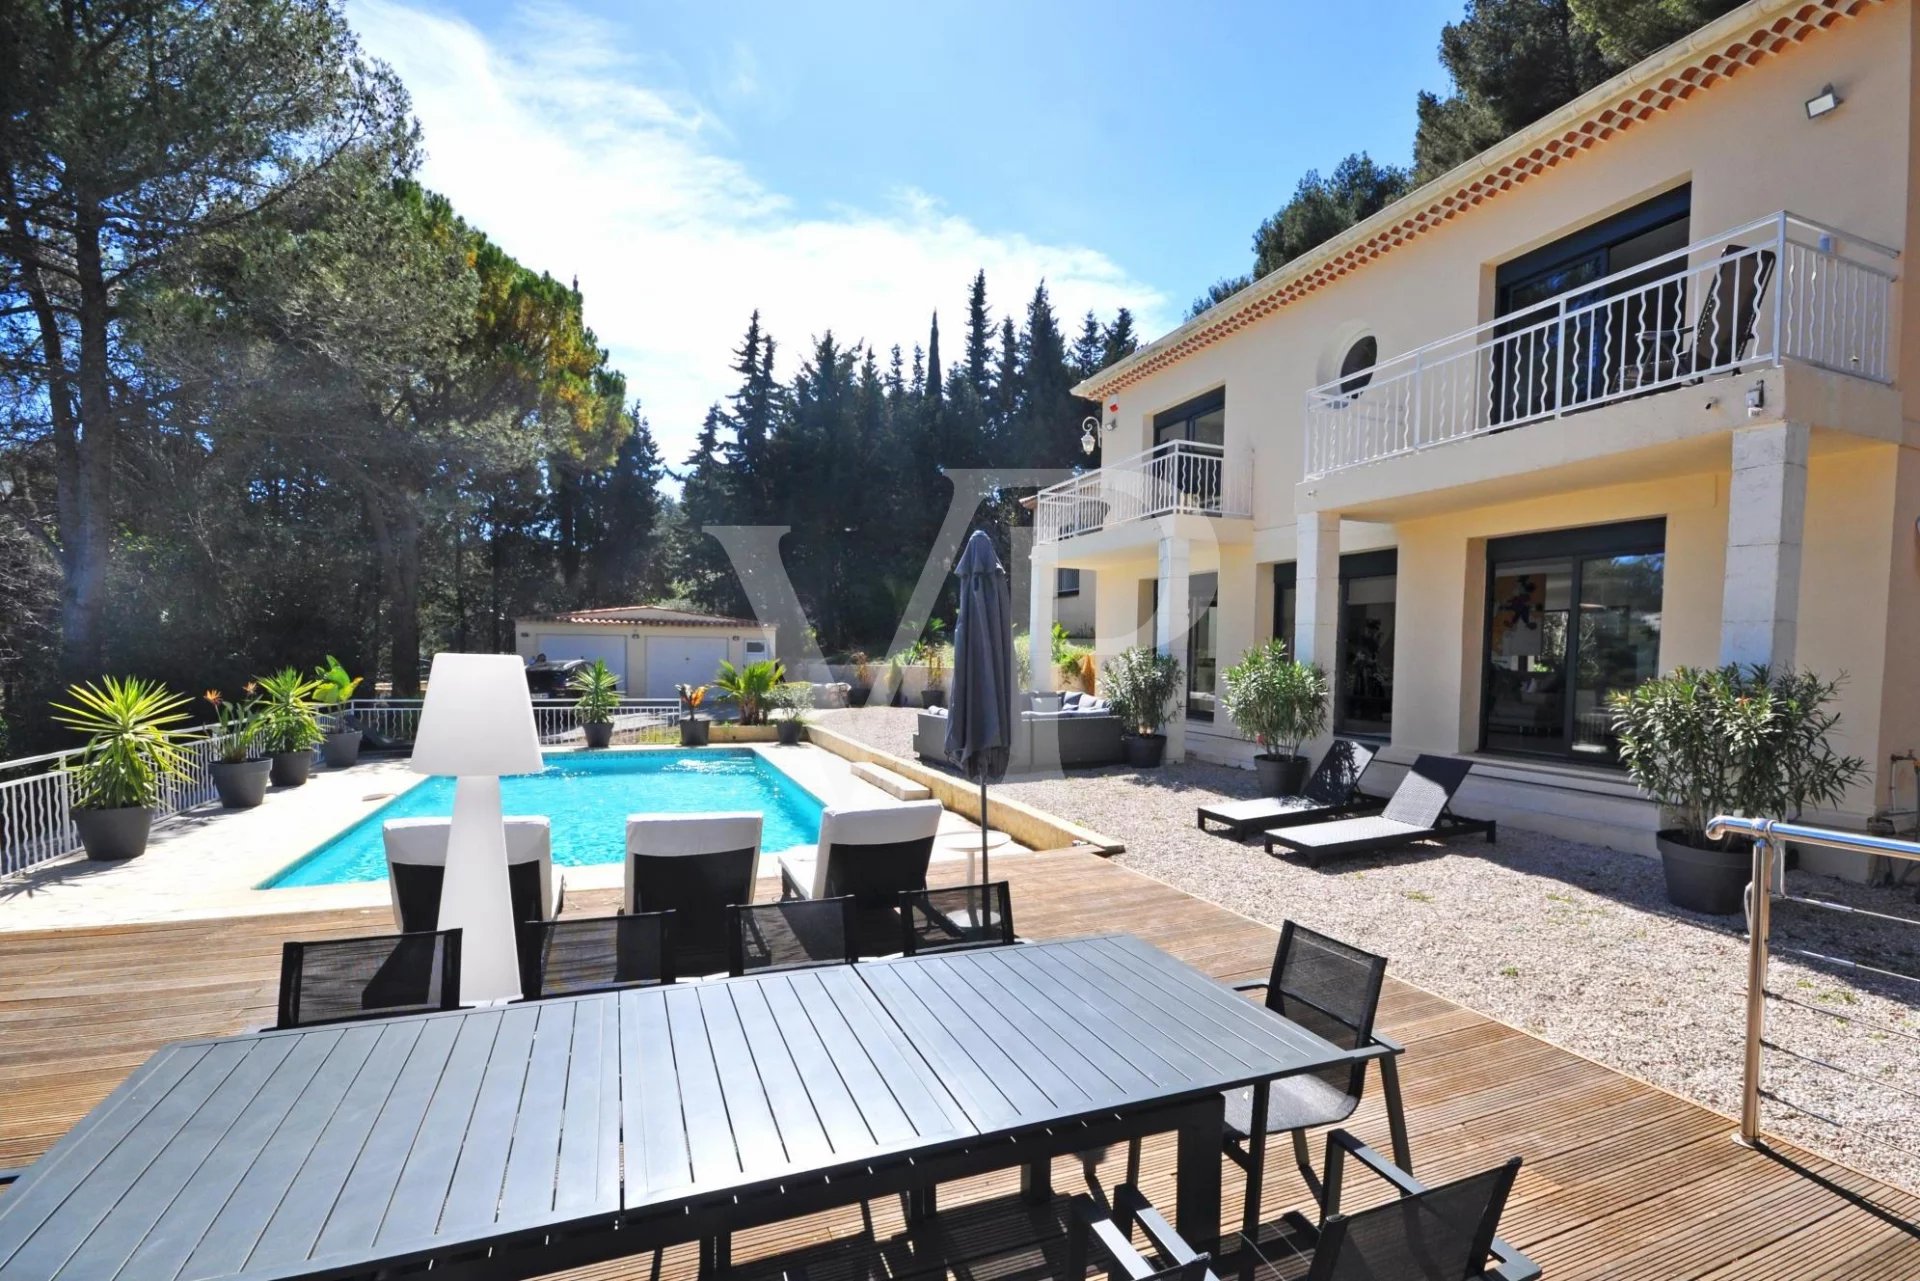 Super Cannes - villa with pool